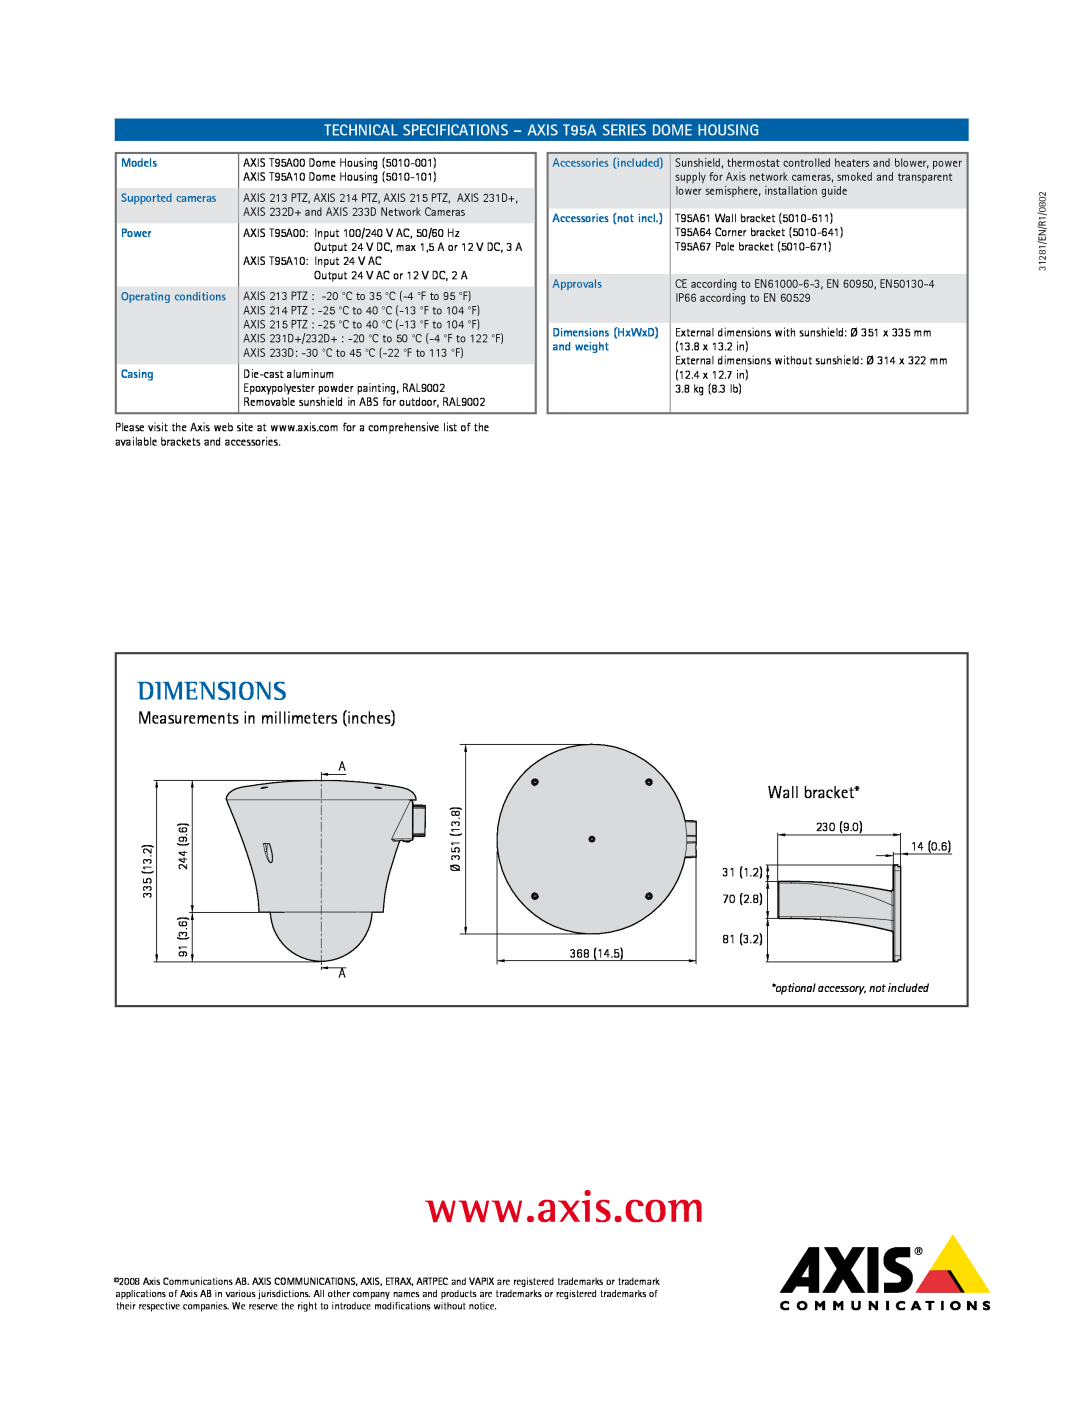 Axis Communications manual Dimensions, TECHNICAL SPECIFICATIONS - AXIS T95A SERIES DOME HOUSING, 13.2, Approvals 